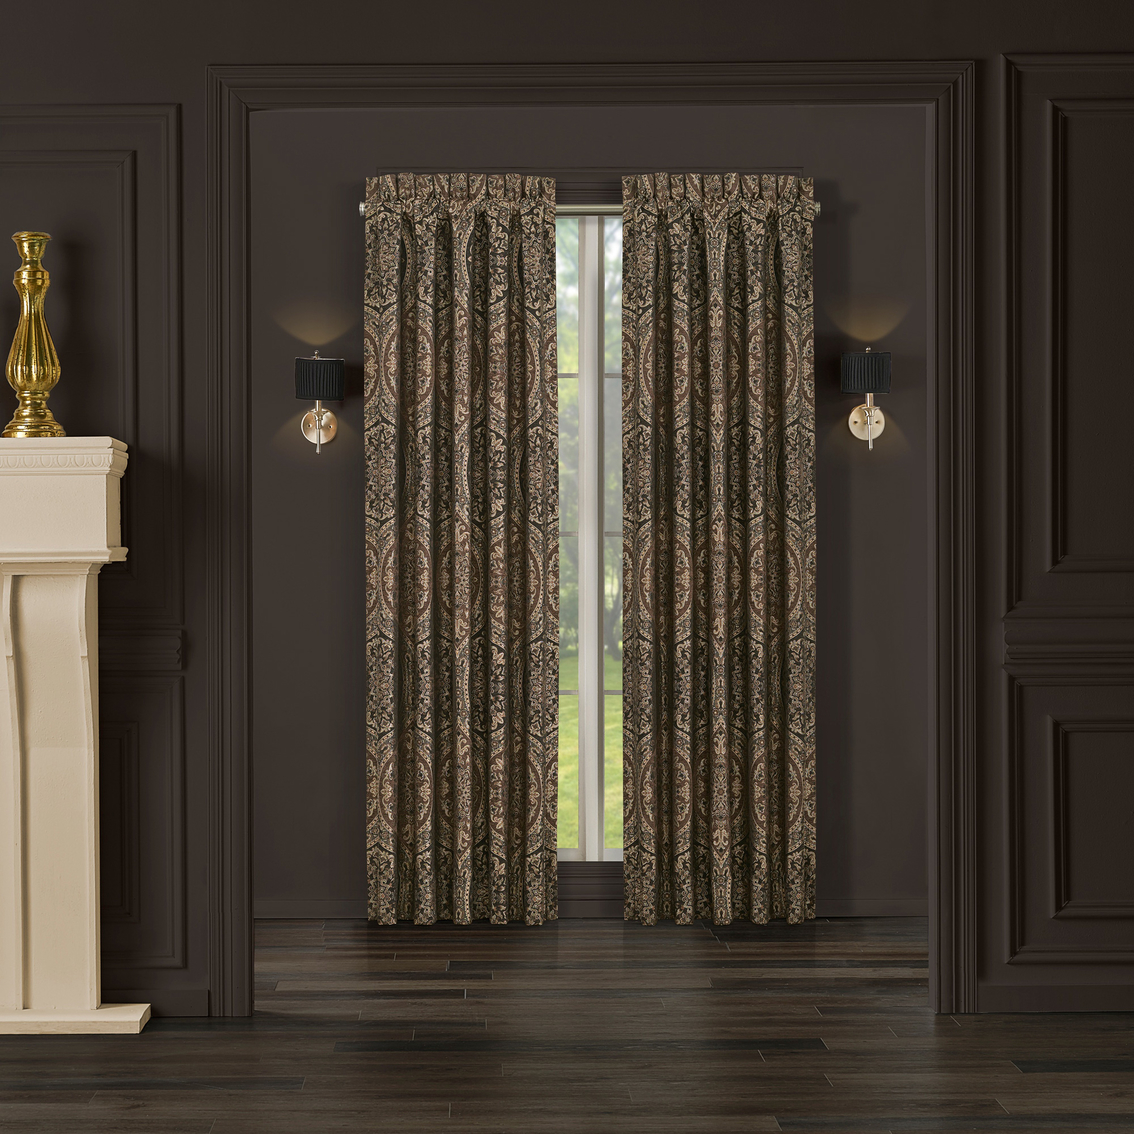 J Queen New York Mahogany Chocolate 84 In Window Panel 2 Pk Curtains Drapes Household Shop The Exchange